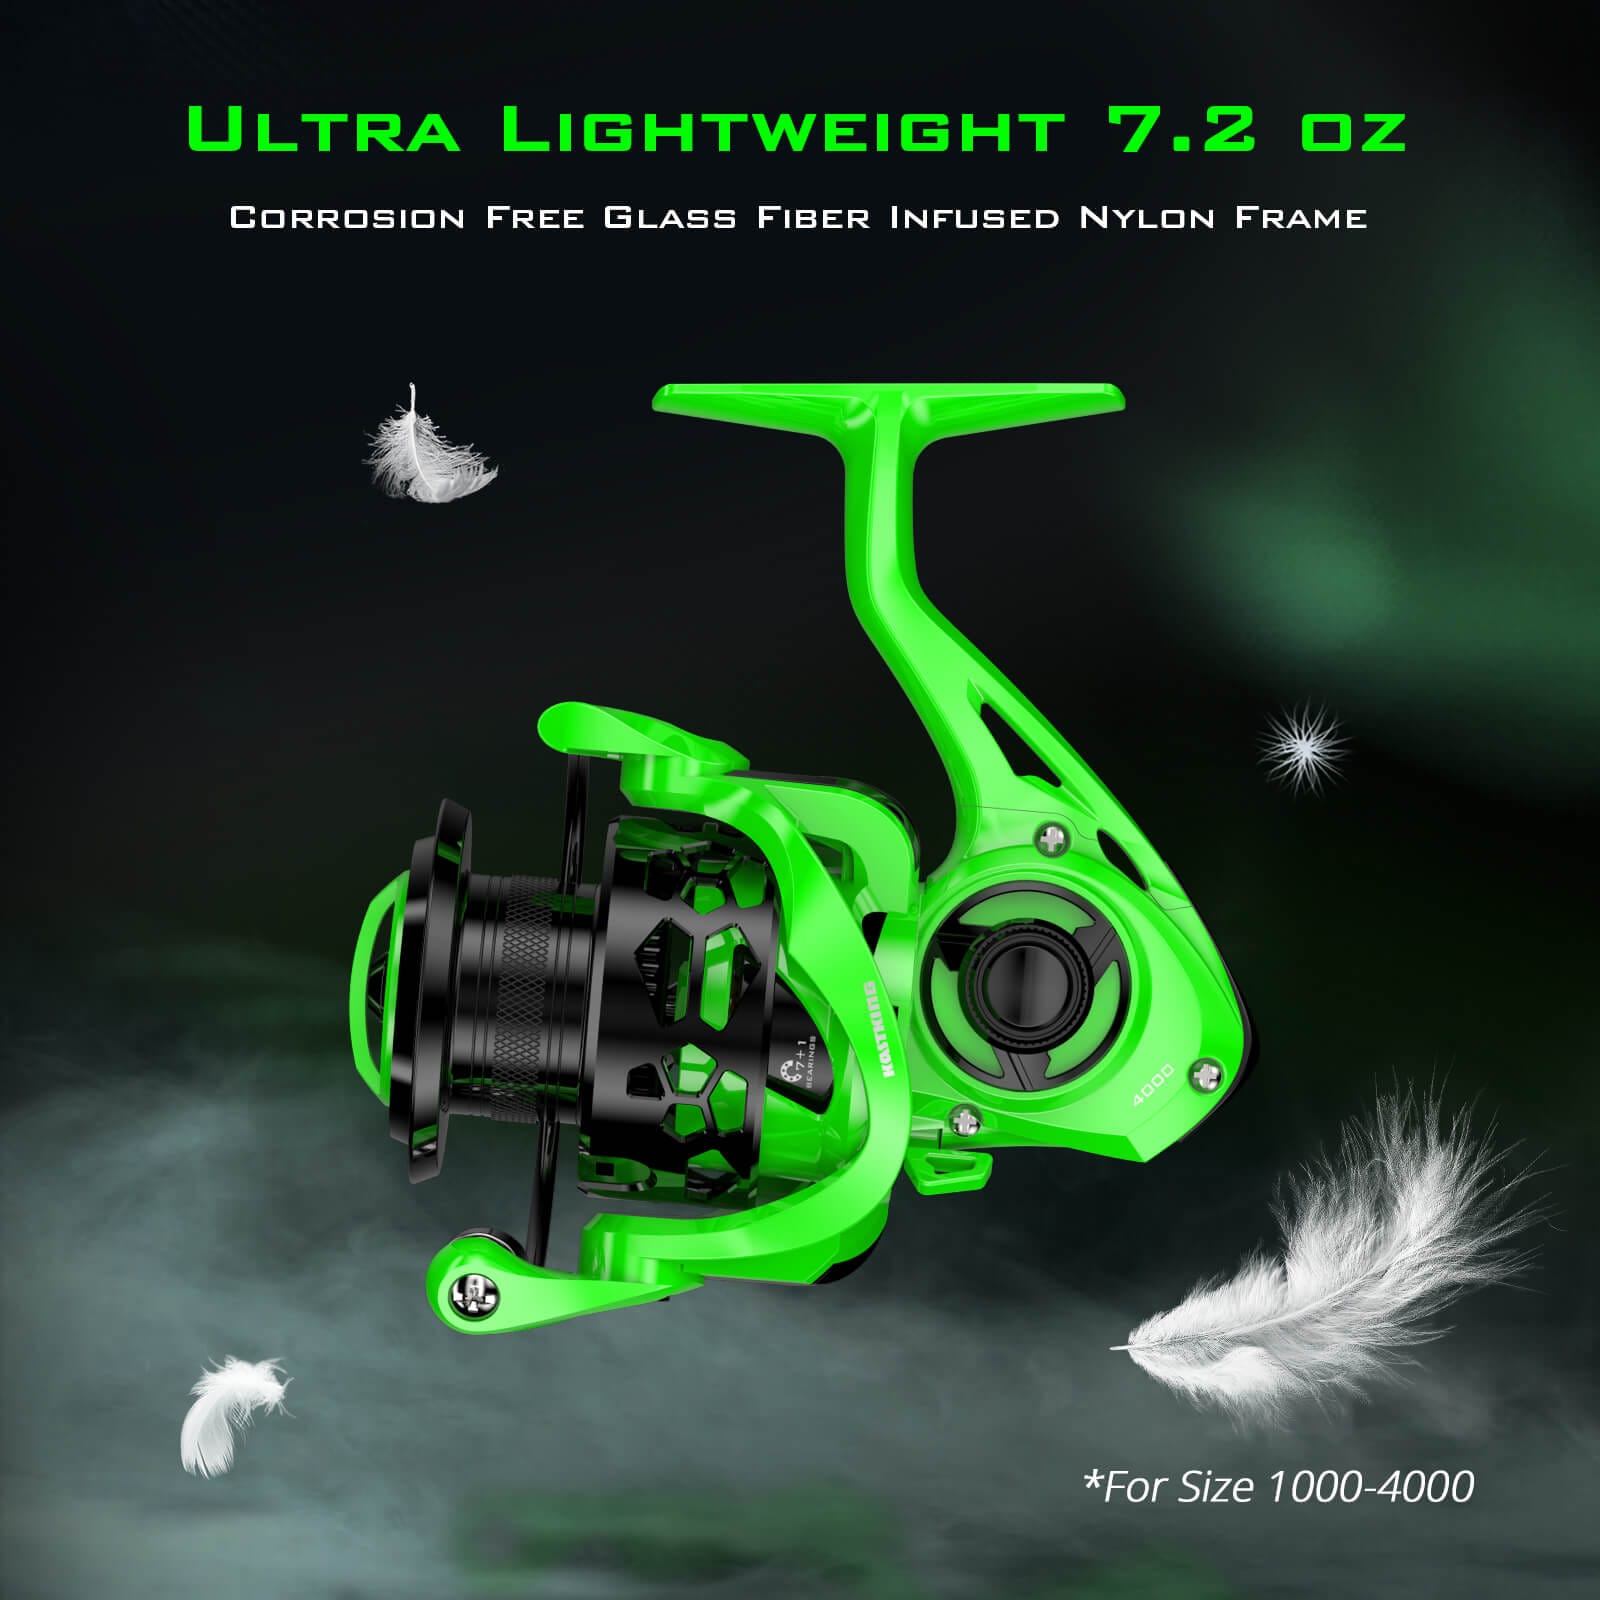 What are the Classic ultralight reels?, Another Spin on Glass